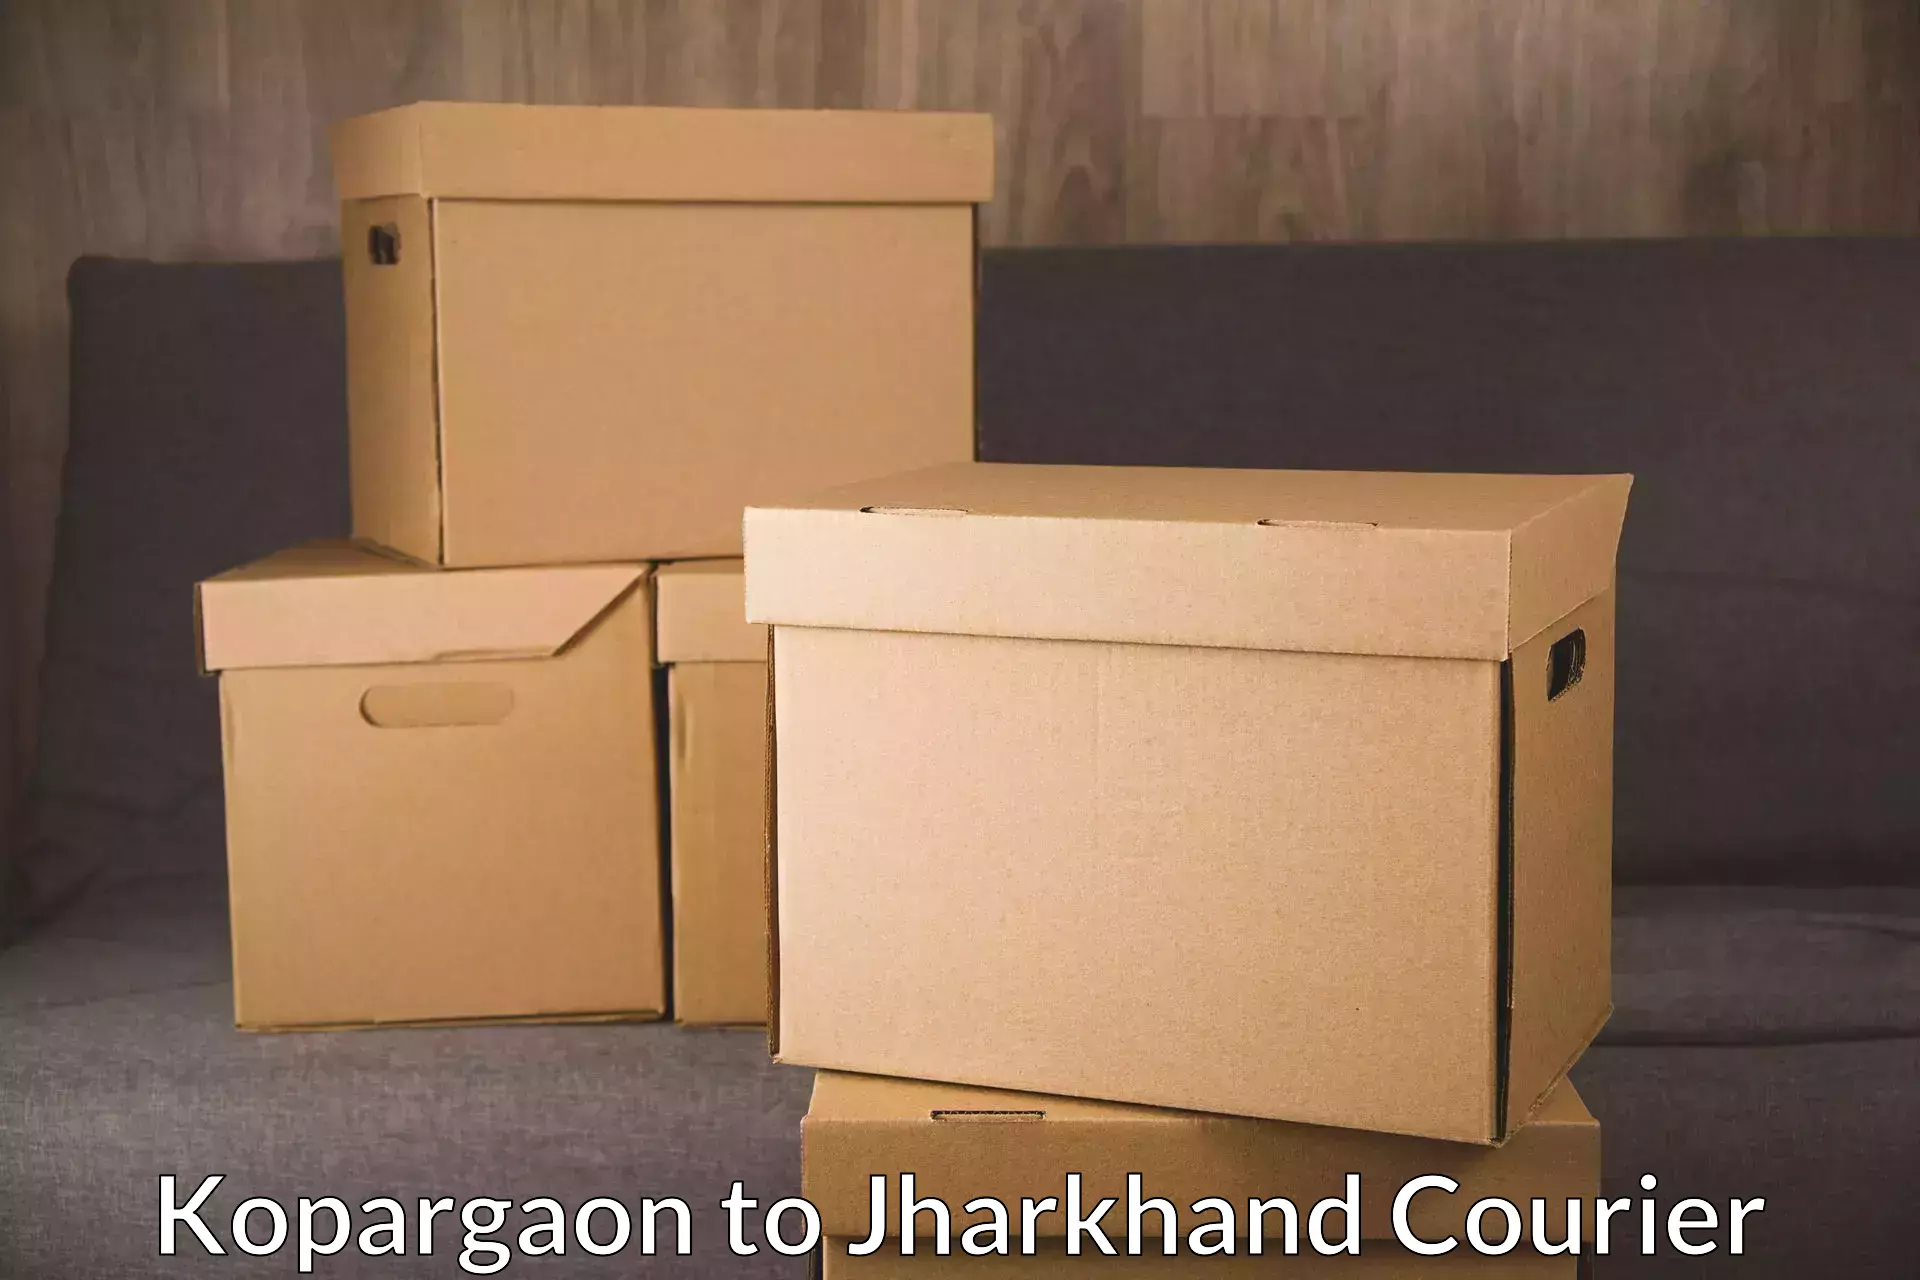 On-call courier service Kopargaon to Chaibasa